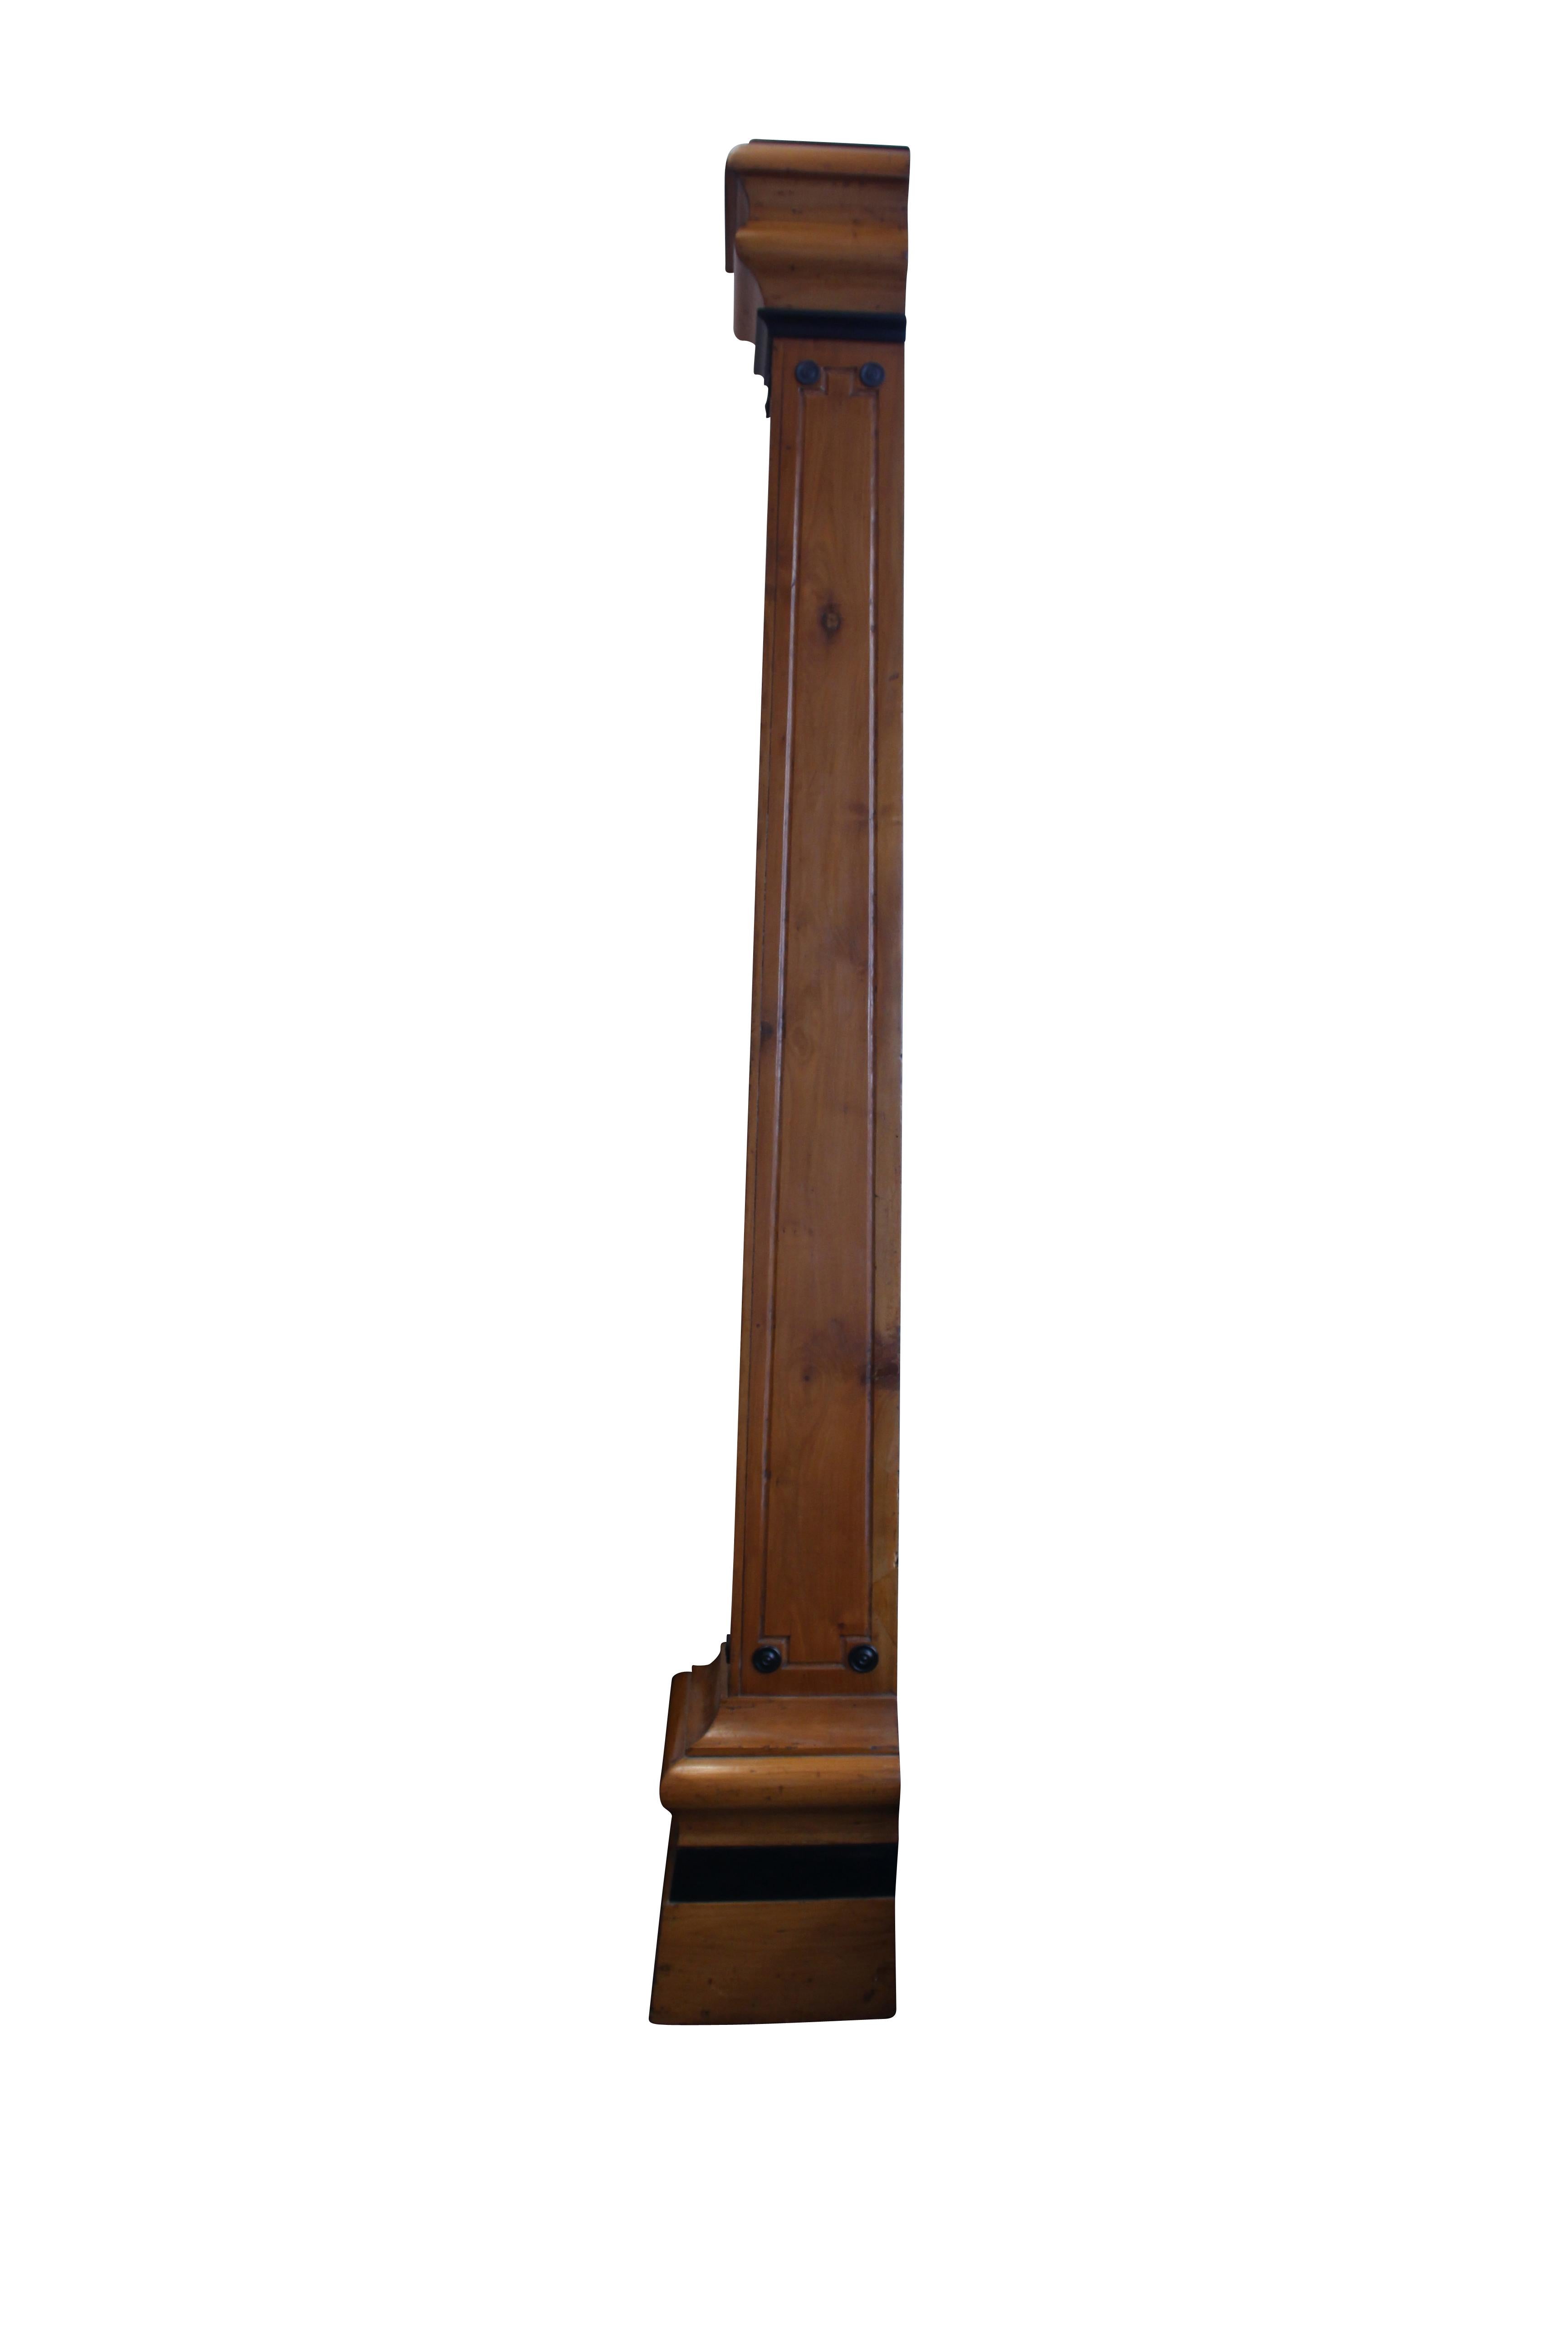 Wiener Werkstätte, neoclassical half column,
Natural and rechampi pine, 
The barrel decorated with moldings,
circa 1900, Austria. 

Measures: Height 178,5 cm, length 30,5 cm, depth 23 cm.